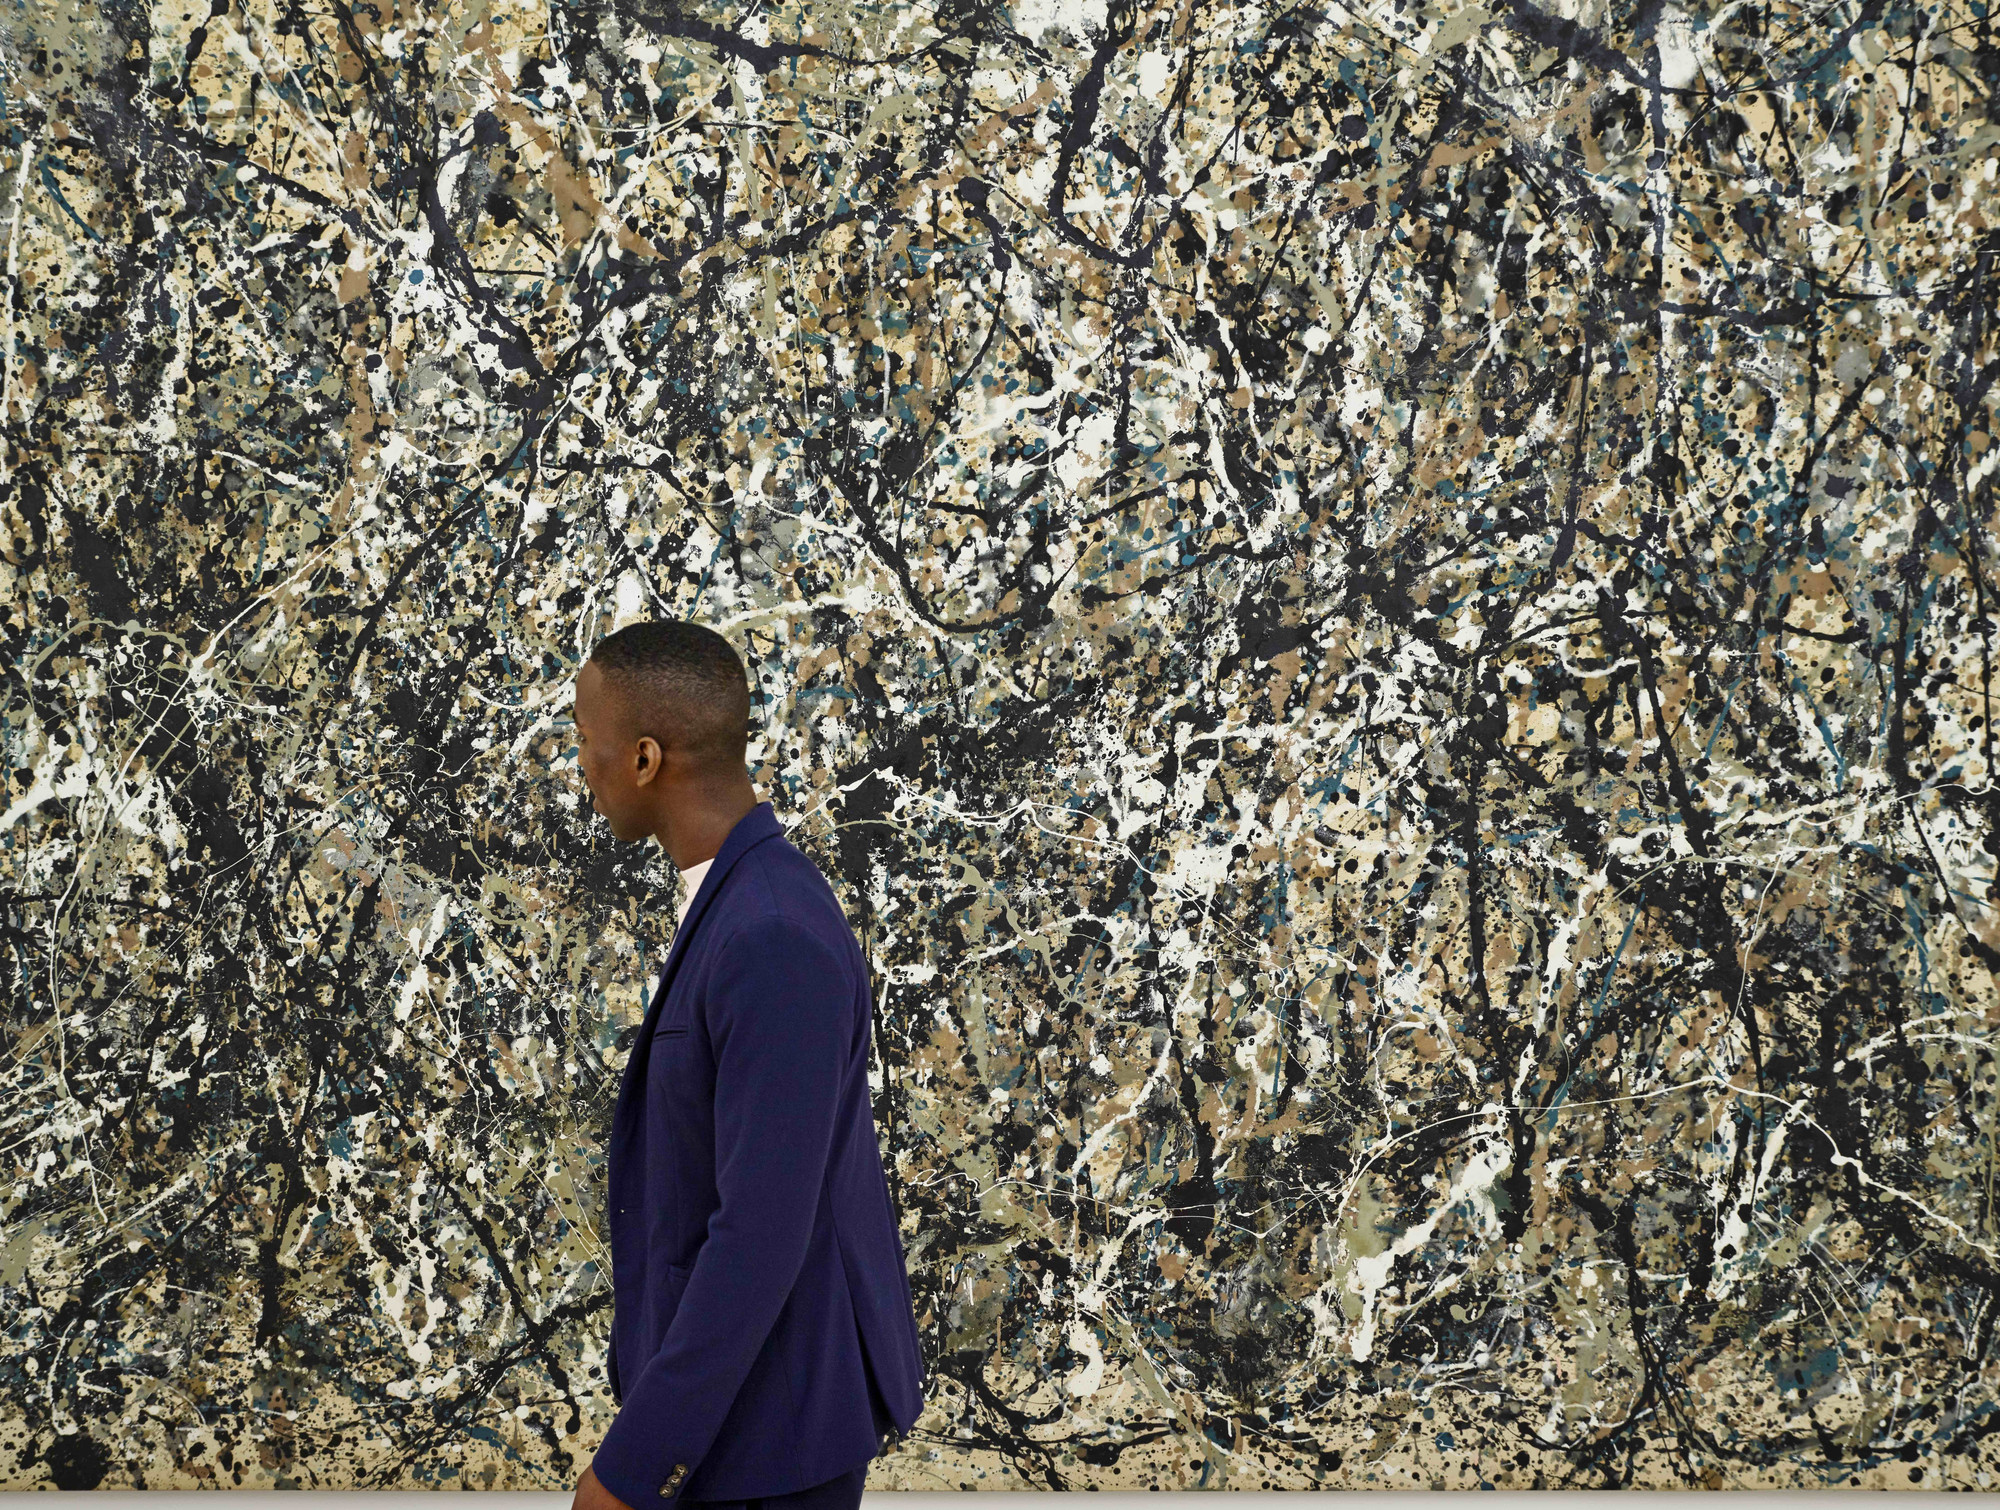 Photo: Noah Kalina. Shown: Jackson Pollock. One: Number 31, 1950 (detail). 1950. Oil and enamel paint on canvas. Sidney and Harriet Janis Collection Fund (by exchange). © 2019 Pollock-Krasner Foundation/Artists Rights Society (ARS), New York